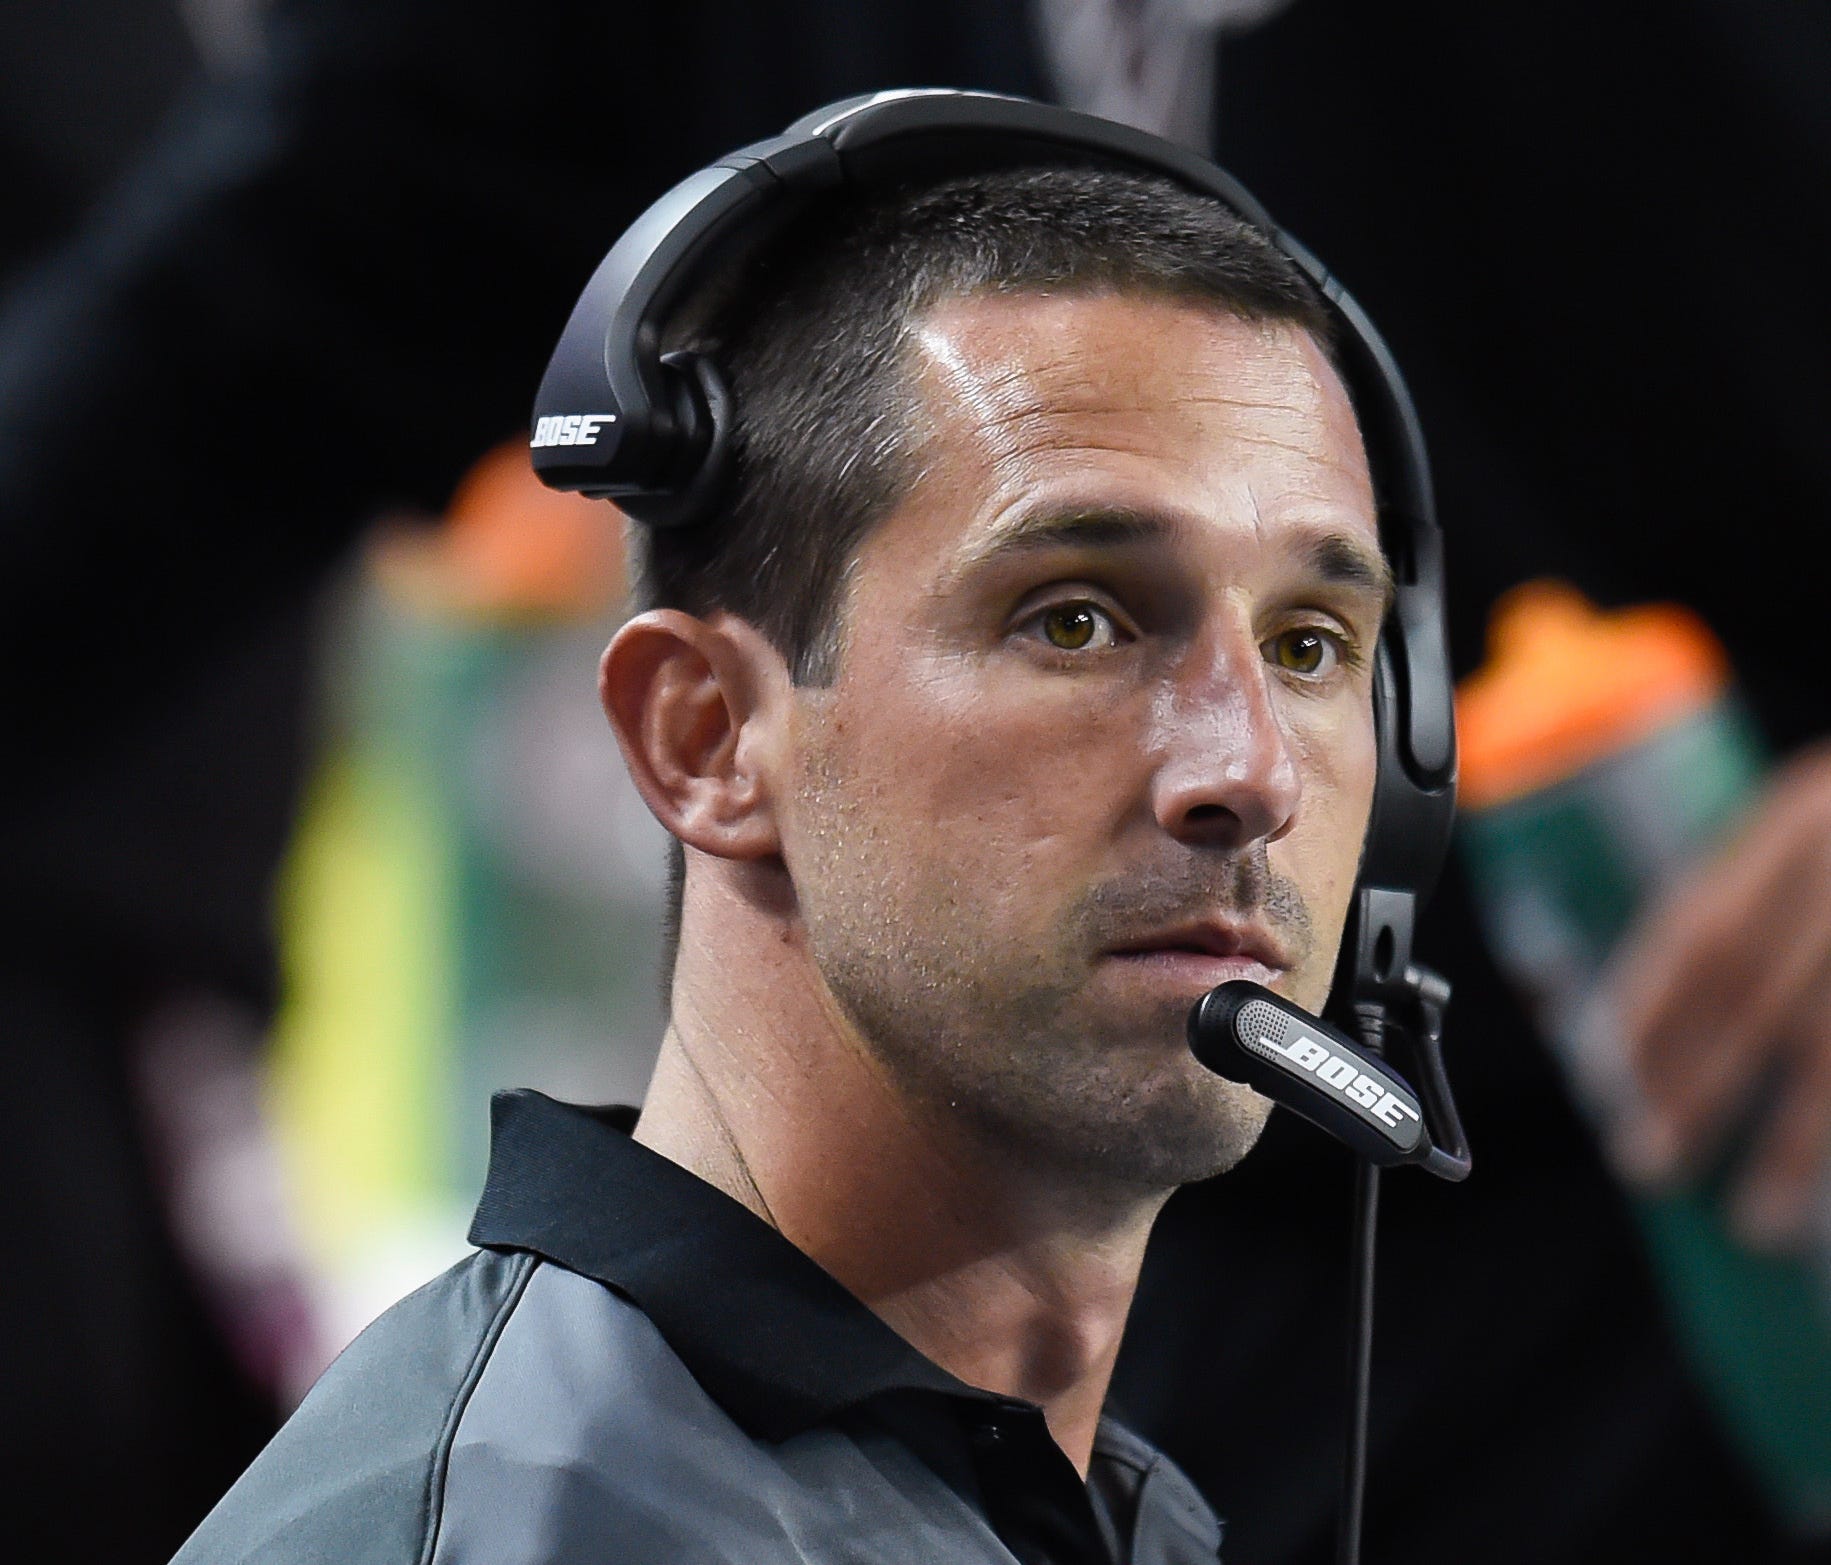 Atlanta Falcons offensive coordinator Kyle Shanahan is shown on the sideline during the game against the Baltimore Ravens during the second half at the Georgia Dome.